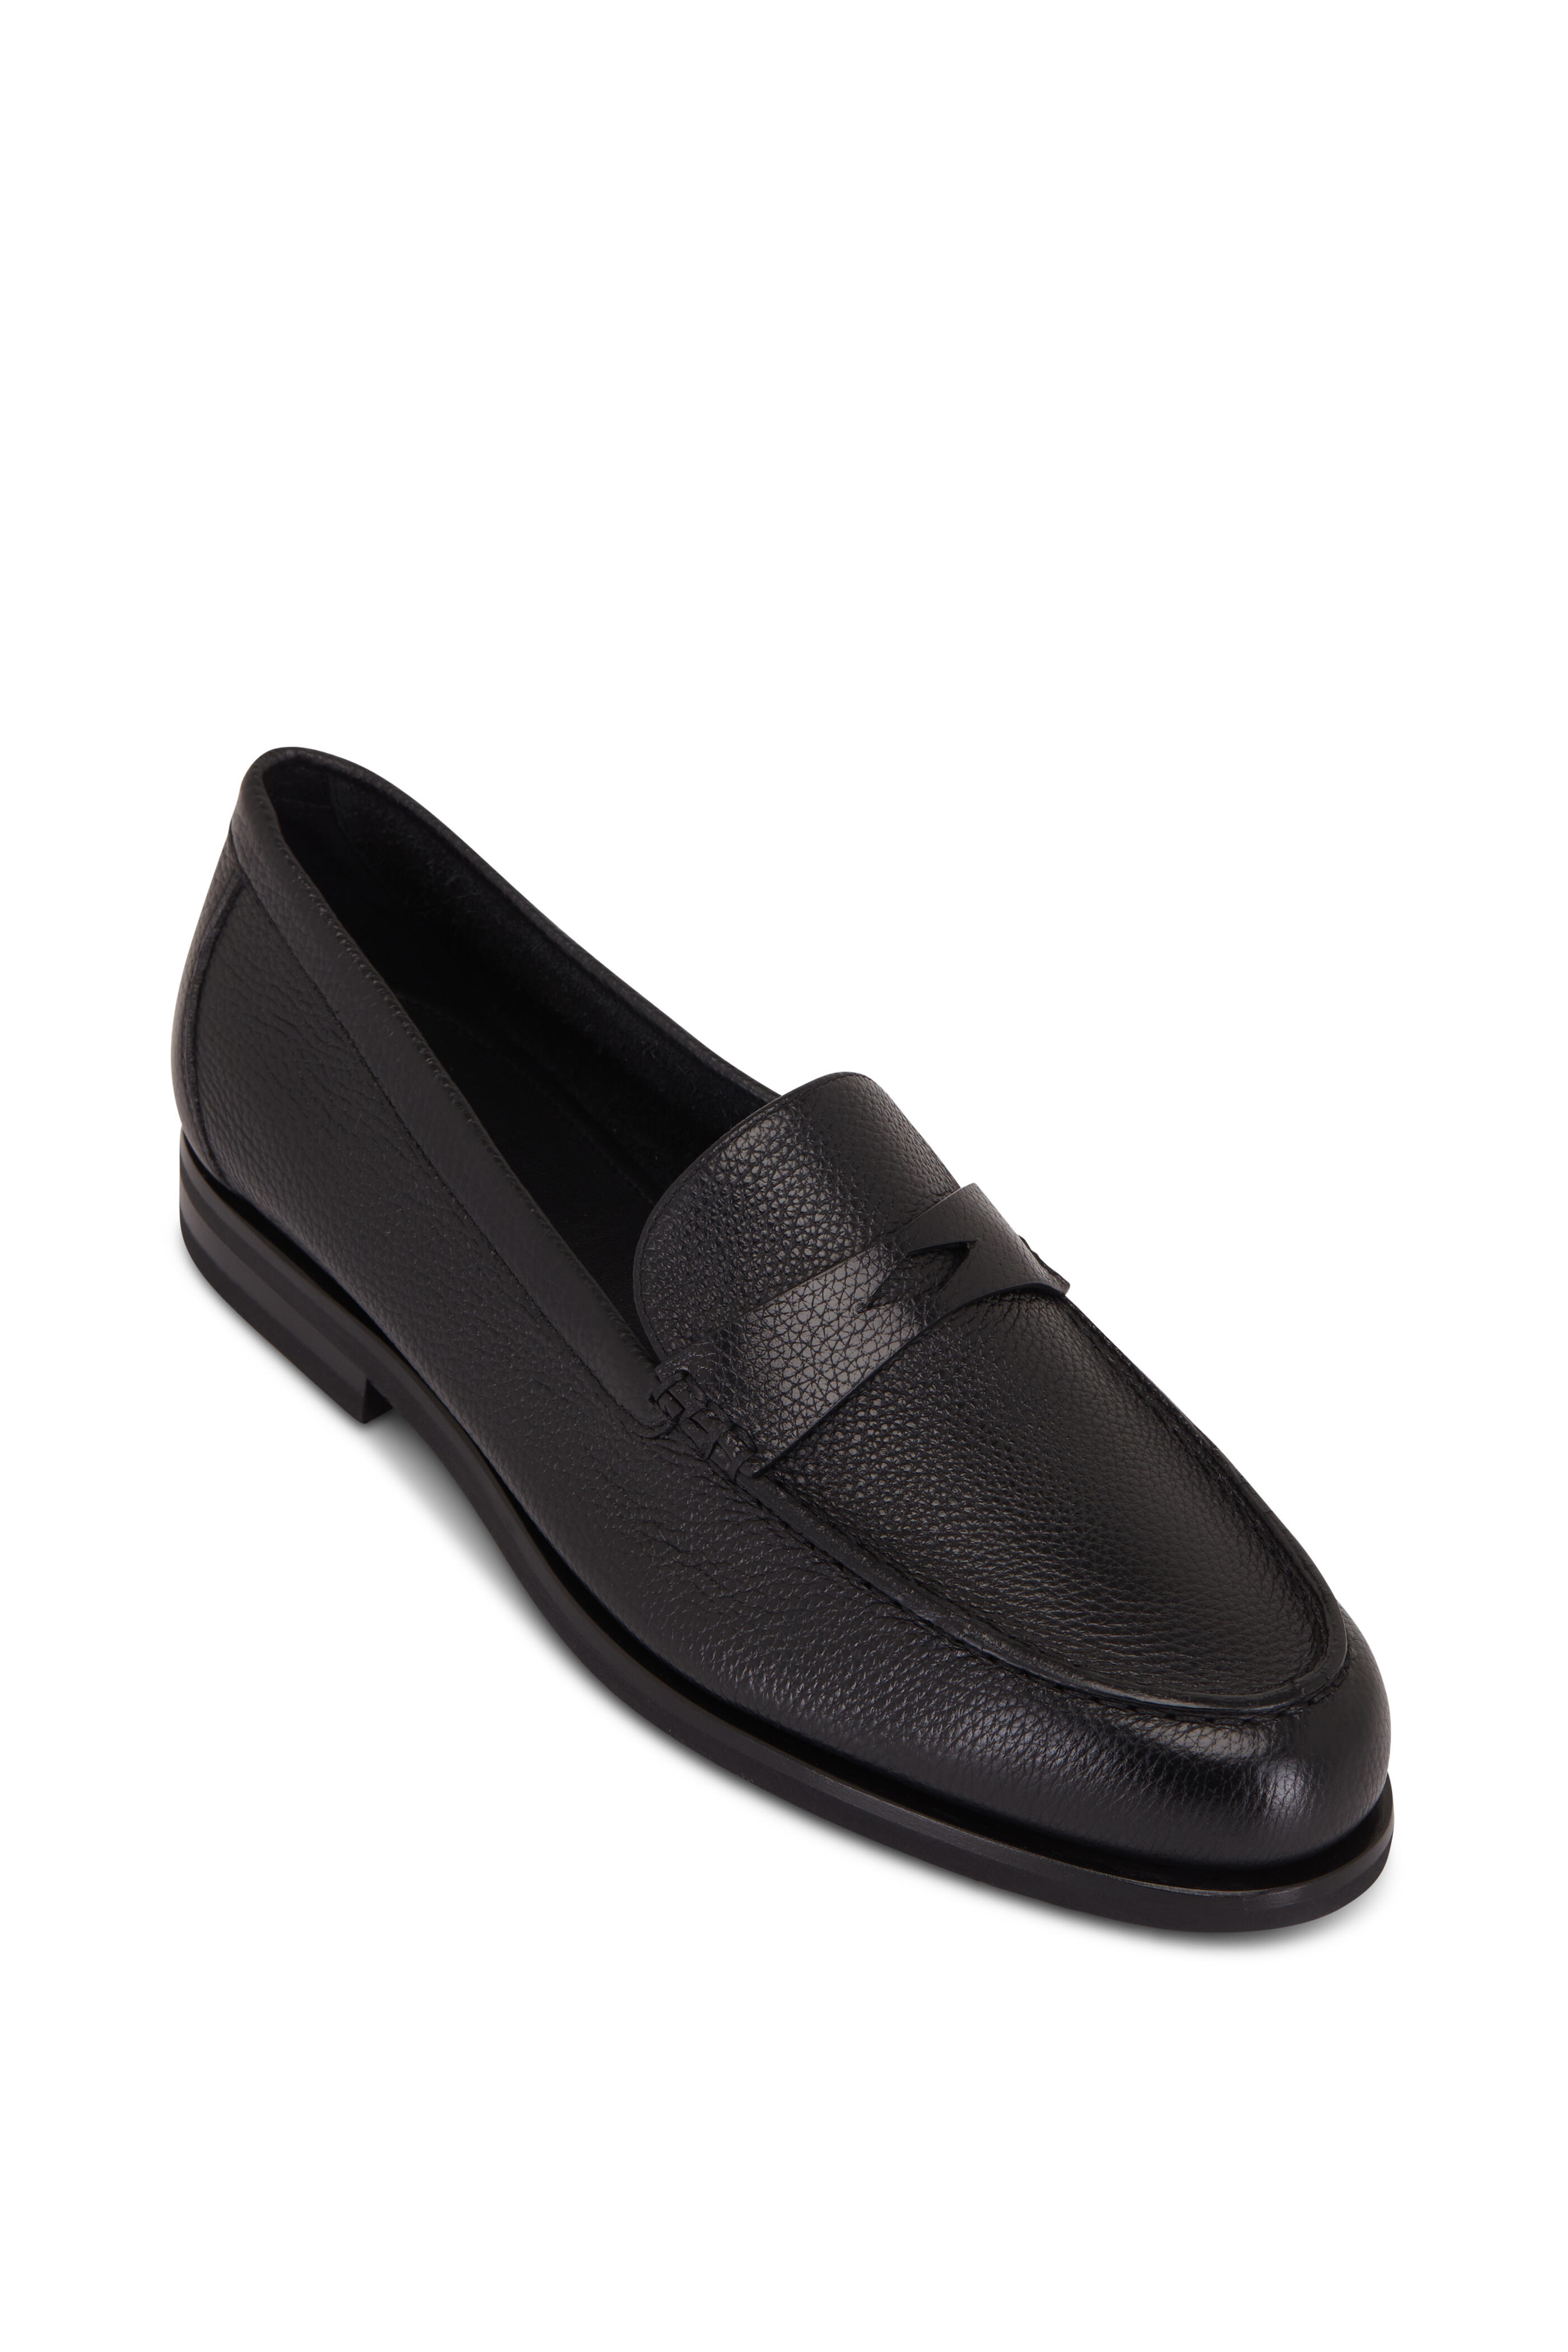 Santoni - Black Tumbled Leather Loafer | Mitchell Stores